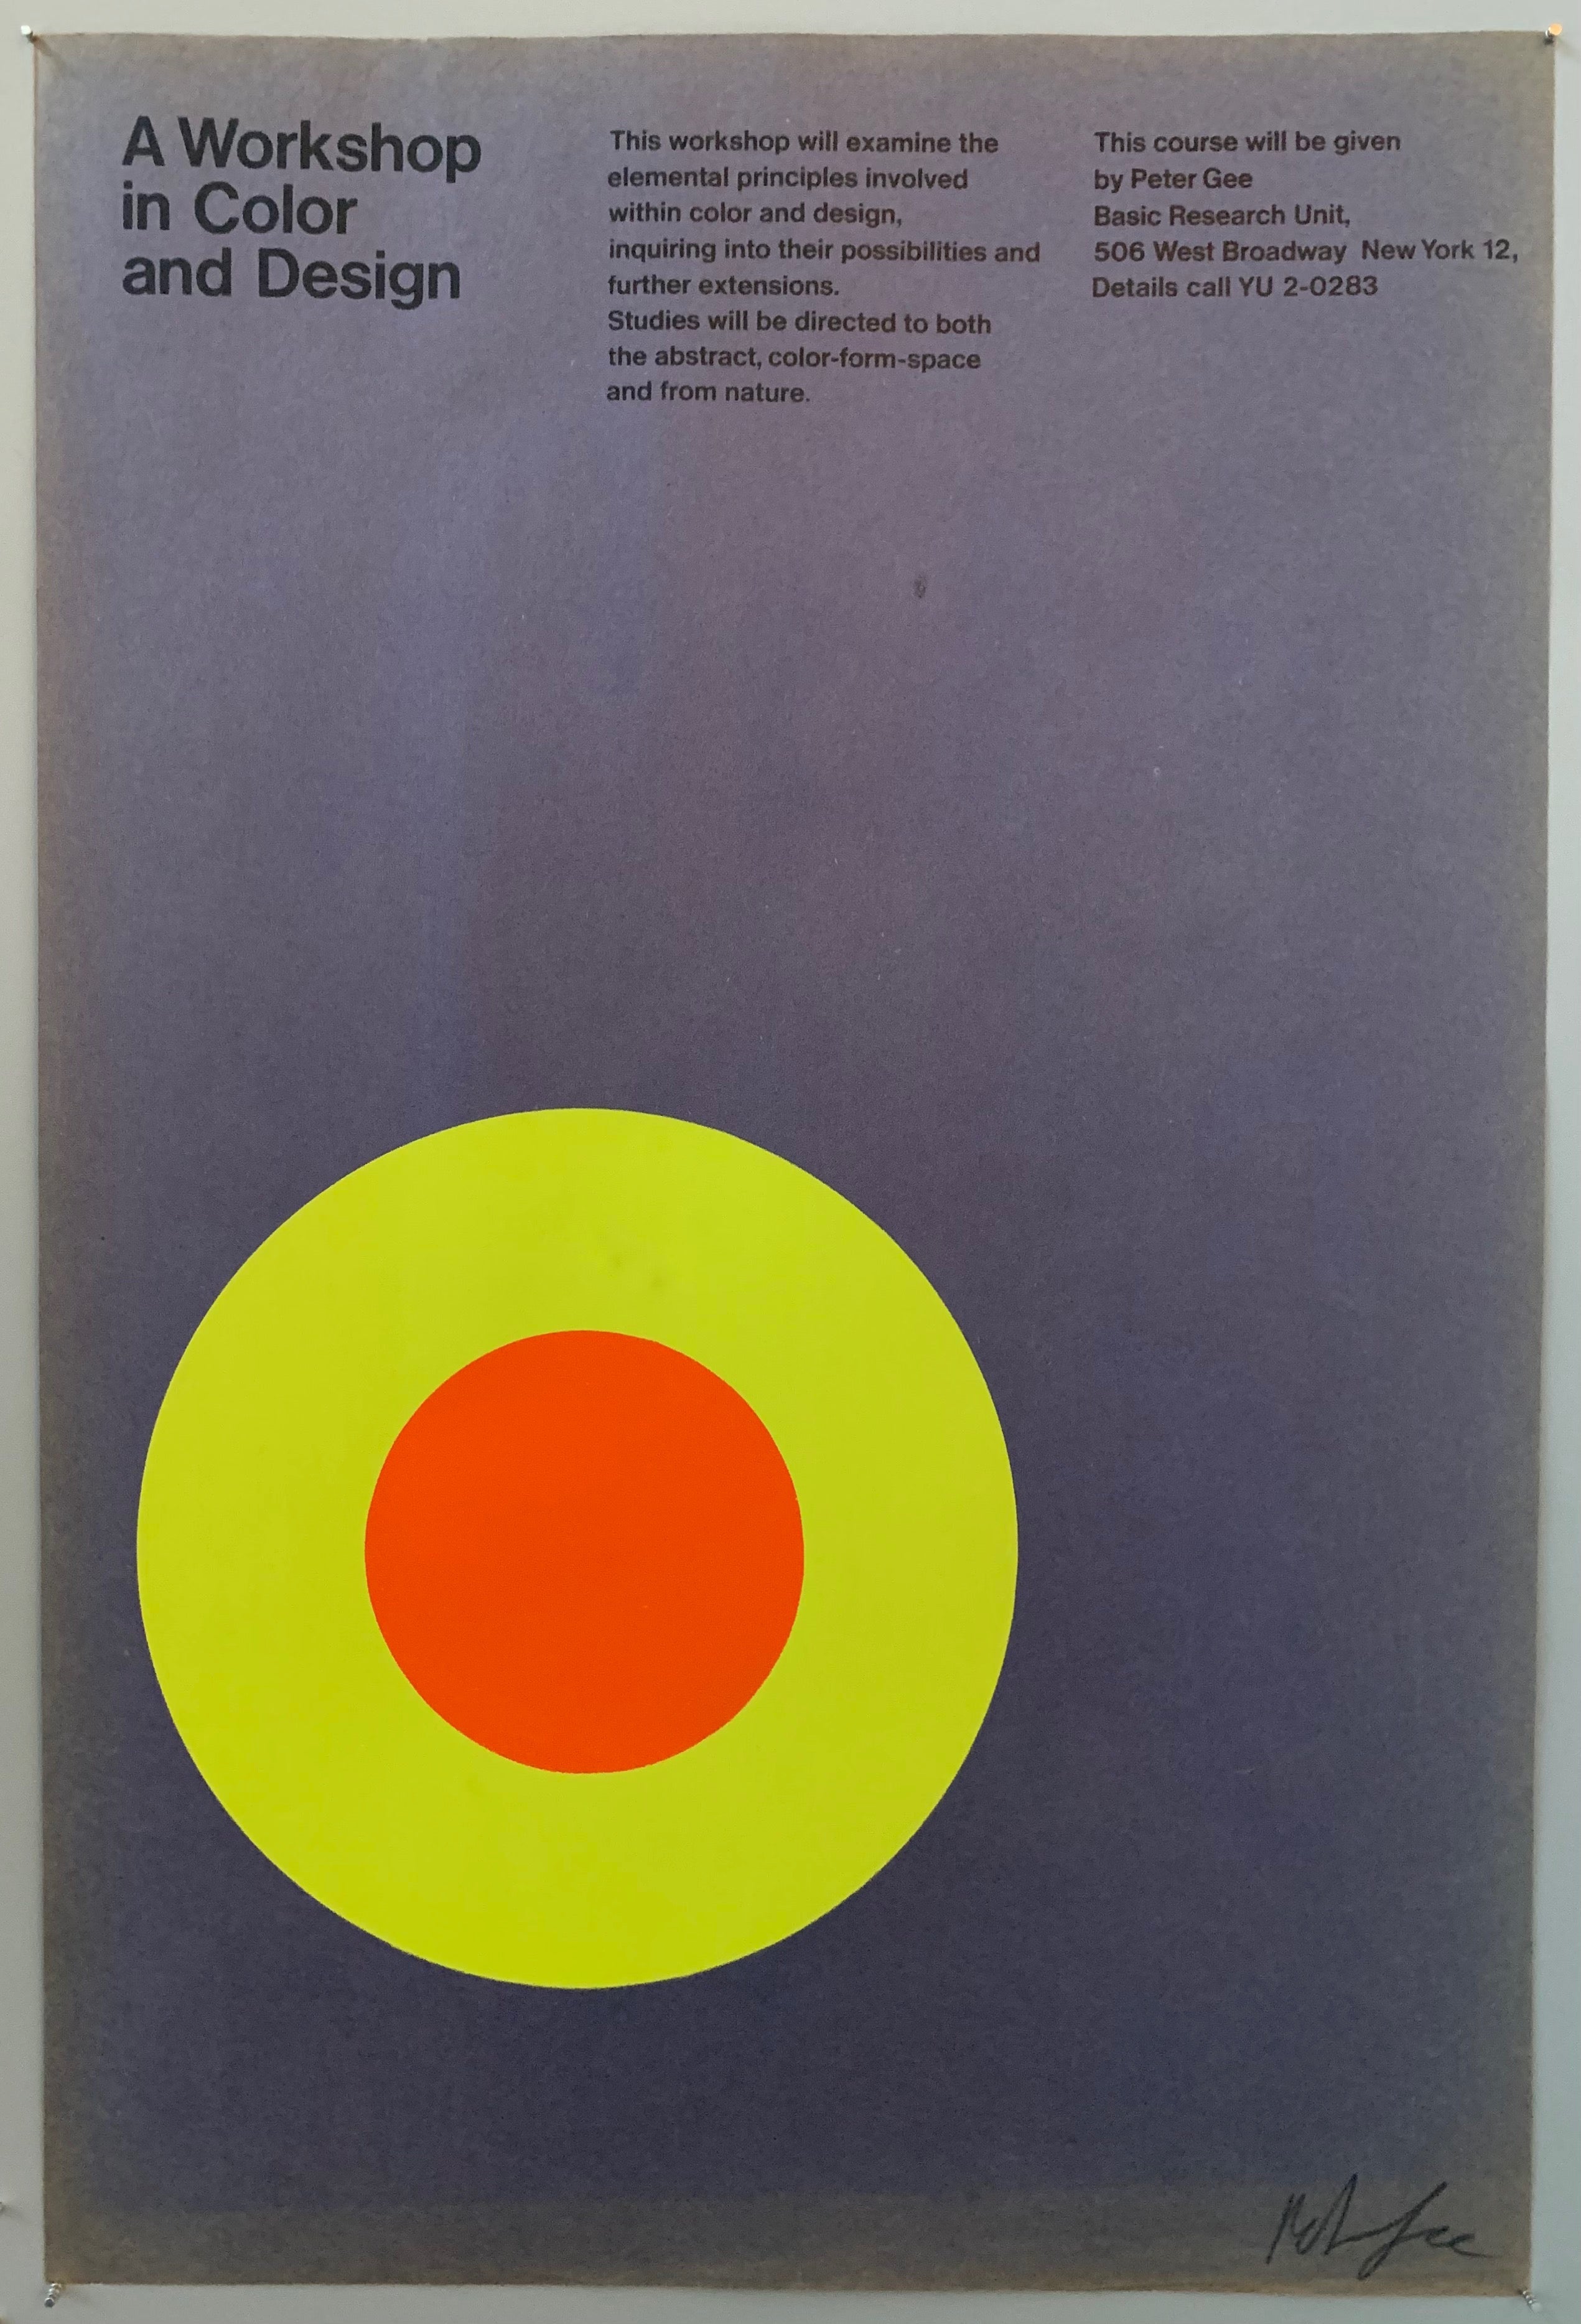 Poster for a design workshop featuring an orange and yellow target